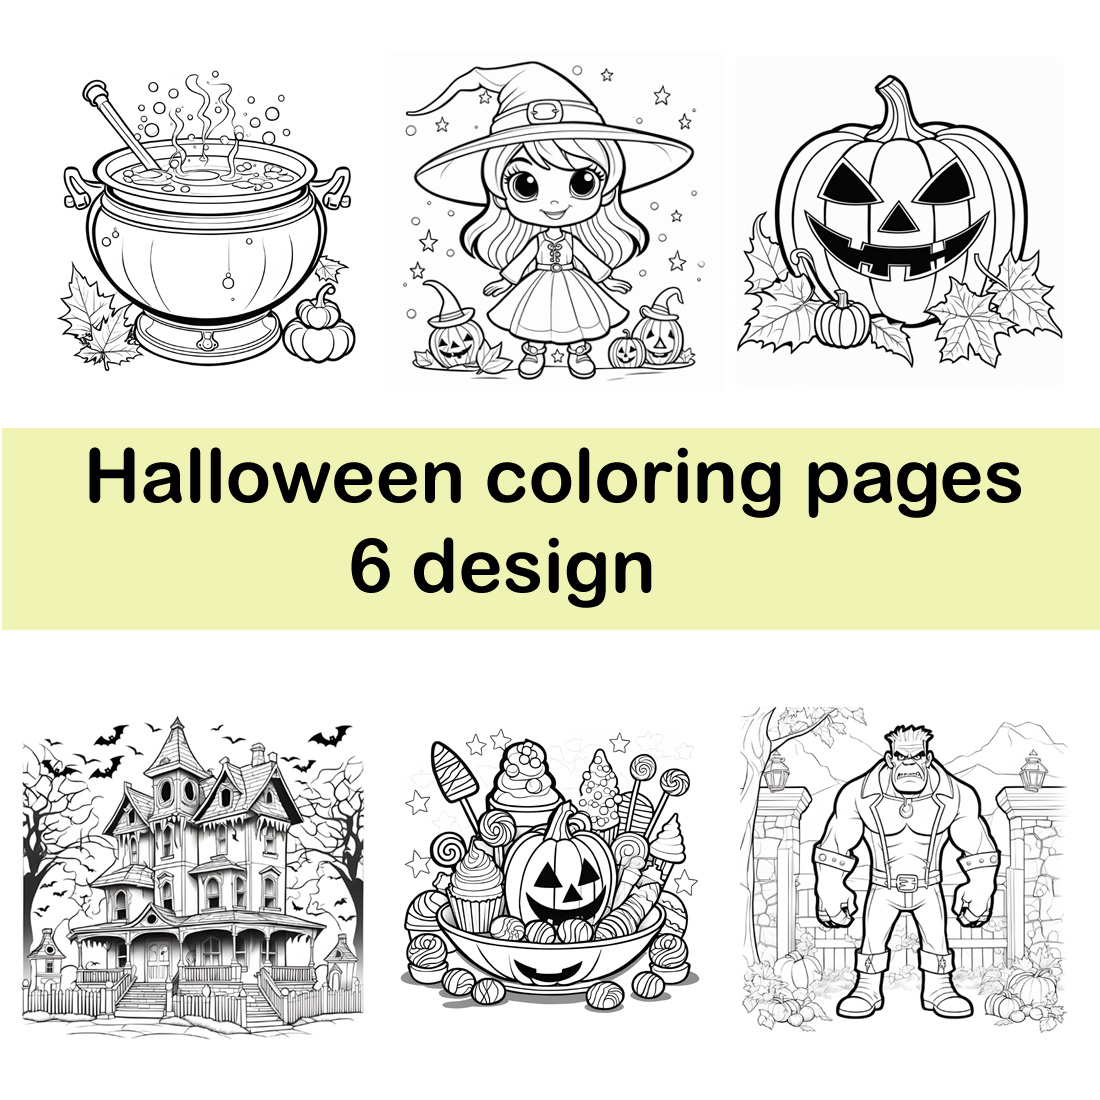 Halloween coloring pages preview image.